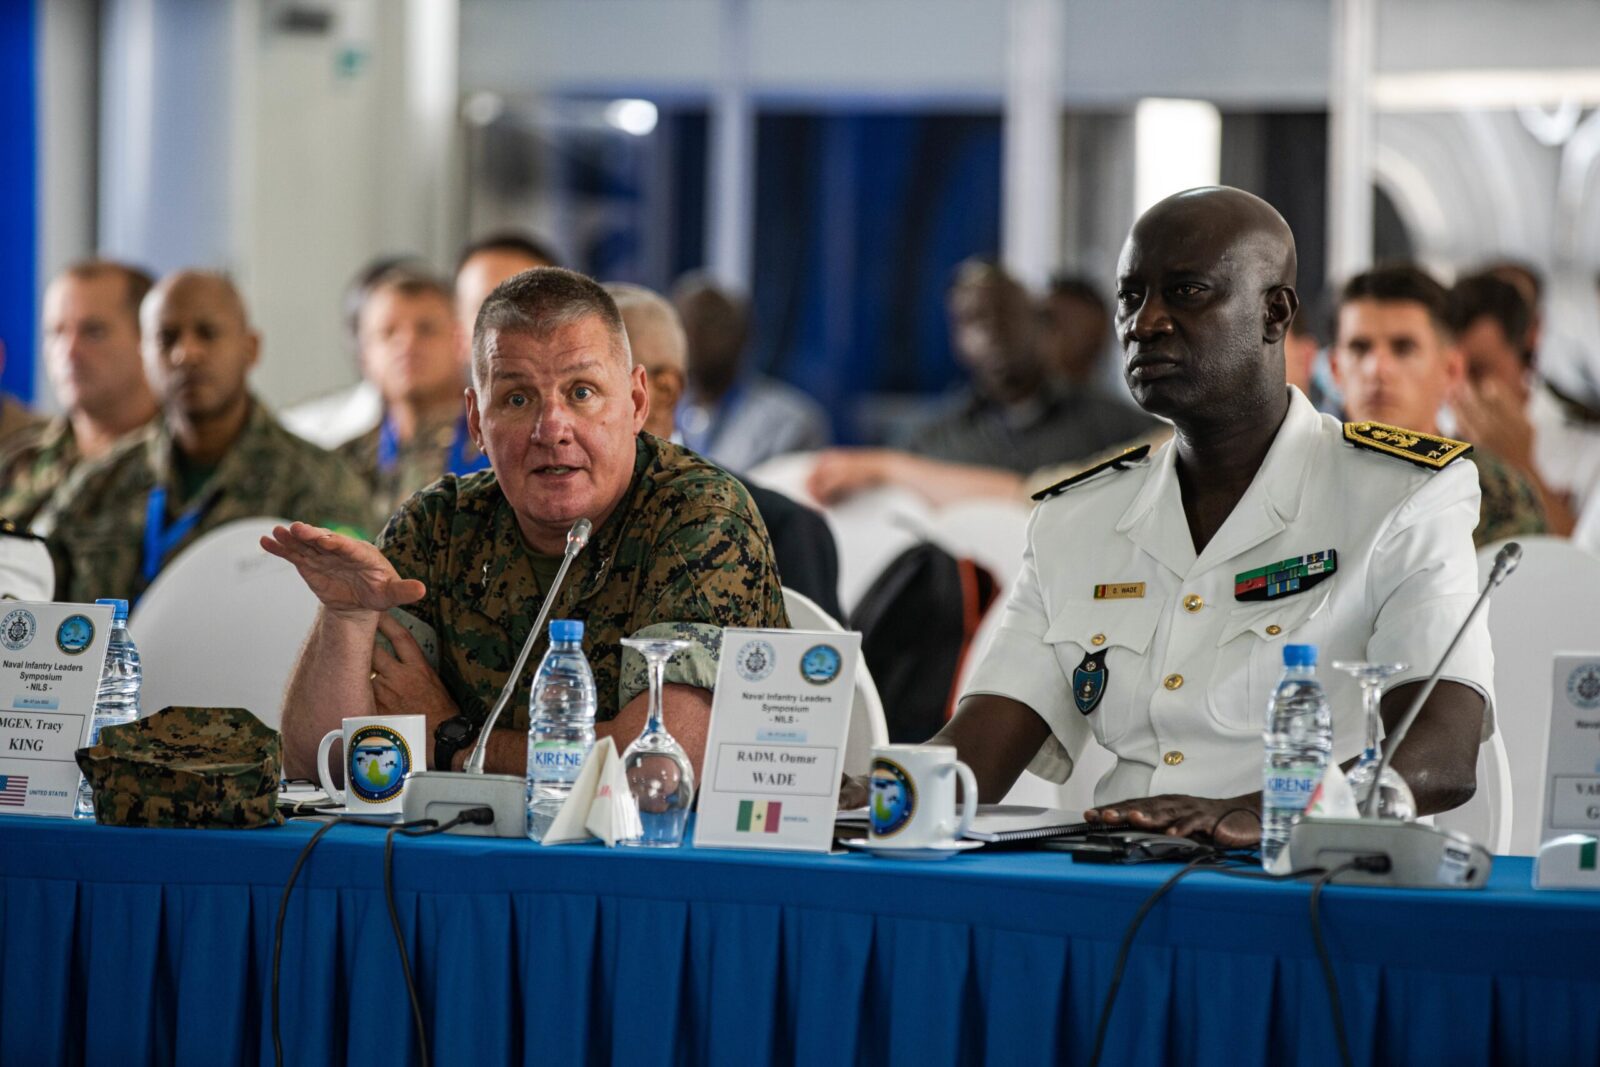 Jul 19, 2022 (Left) U.S. Marine Corps Maj. Gen. Tracy W. King, commander of U.S. Marine Corps Forces Europe and Africa and (Right) Senegalese Naval Chief of Staff Rear Adm. Oumar Wade speak with African military partners during the Naval Infantry Leadership Symposium - Africa 2022 in Dakar, Senegal, July 6, 2022. NILS -A is a multinational, Africa-focused forum, designed to bring together partner nations with marine forces and naval infantries to develop interoperability, crisis response capabilities, and foster relationships which will improve Africa’s maritime domain security.